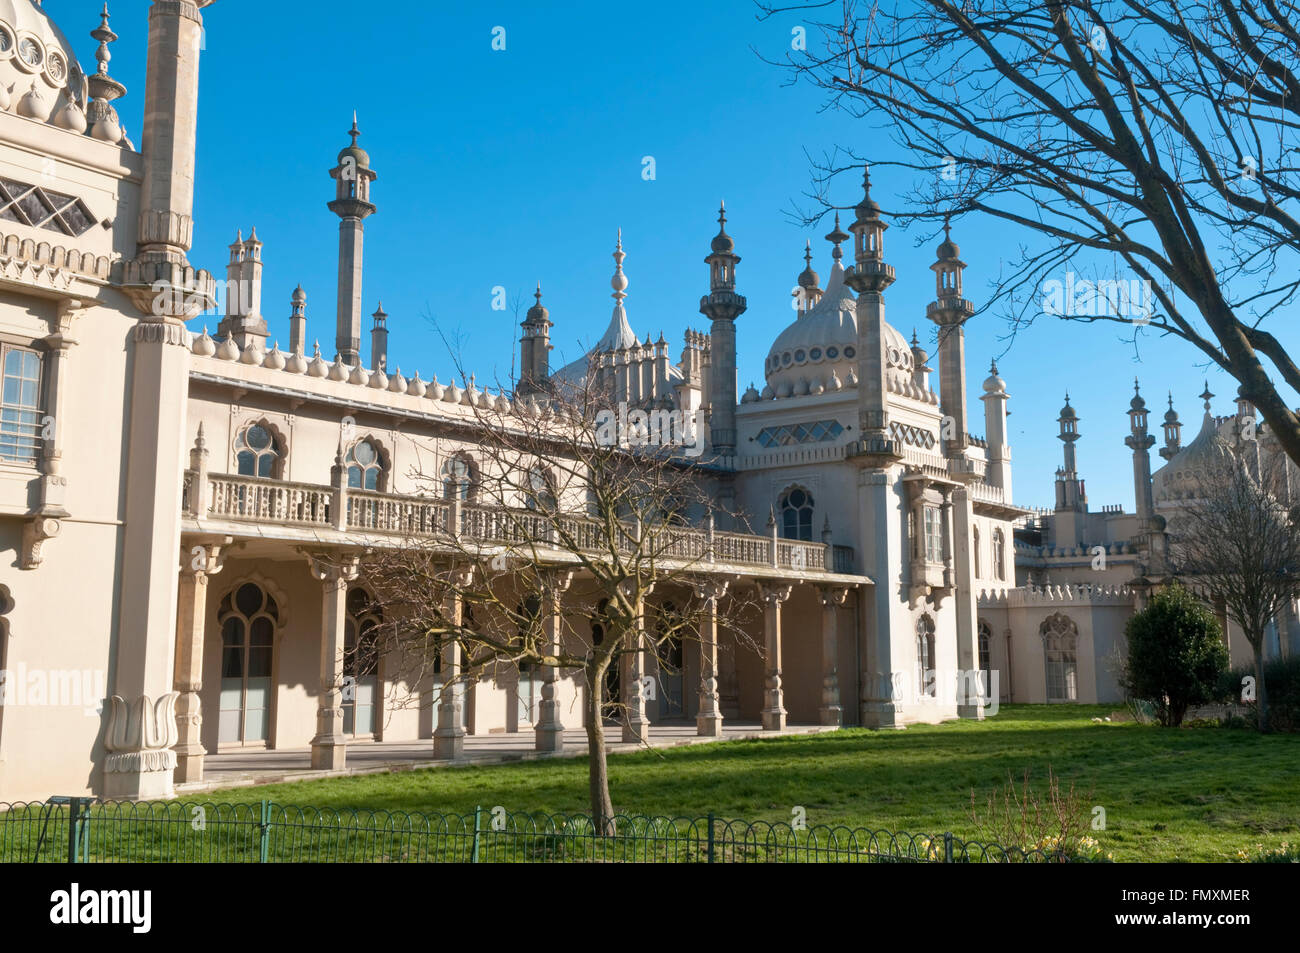 Detail of the columns, towers and domes on the north side of the Royal Pavilion in Brighton, East Sussex, England Stock Photo